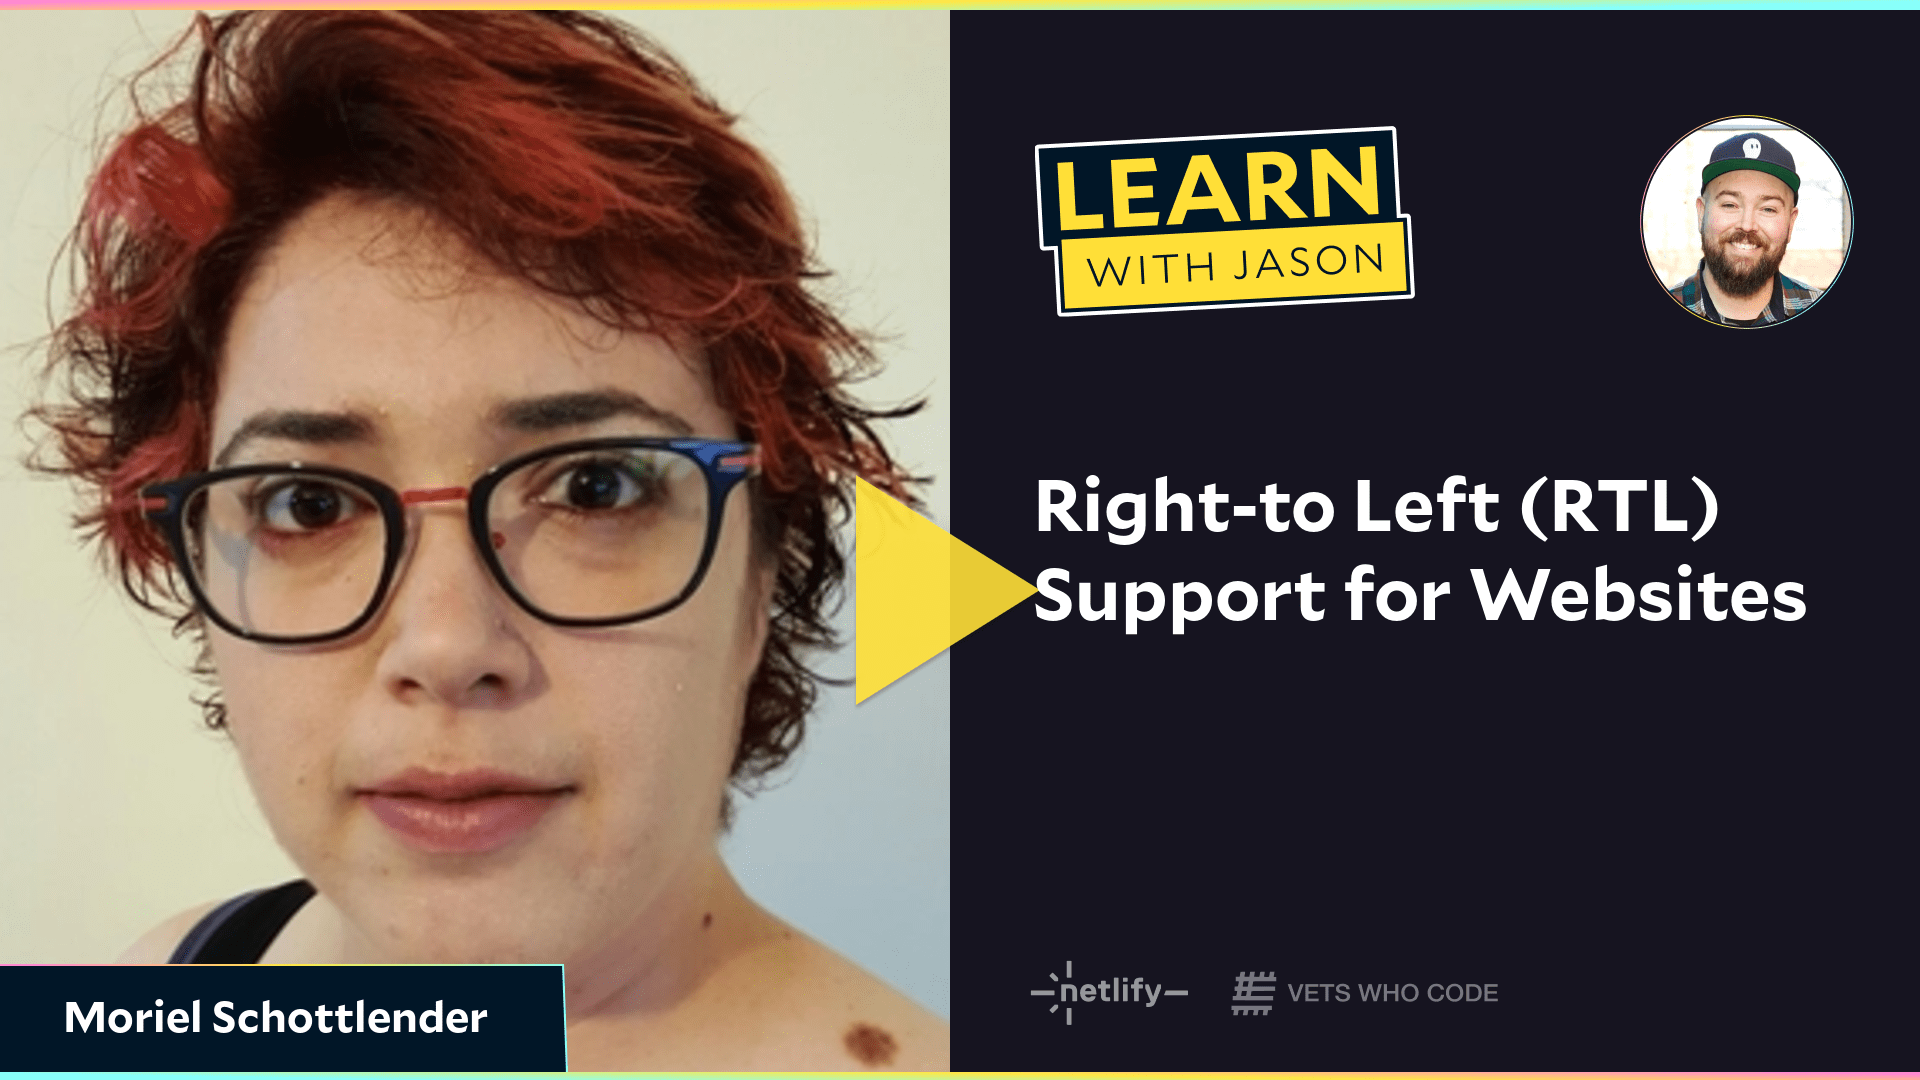 Right-to Left (RTL) Support for Websites (with Moriel Schottlender)